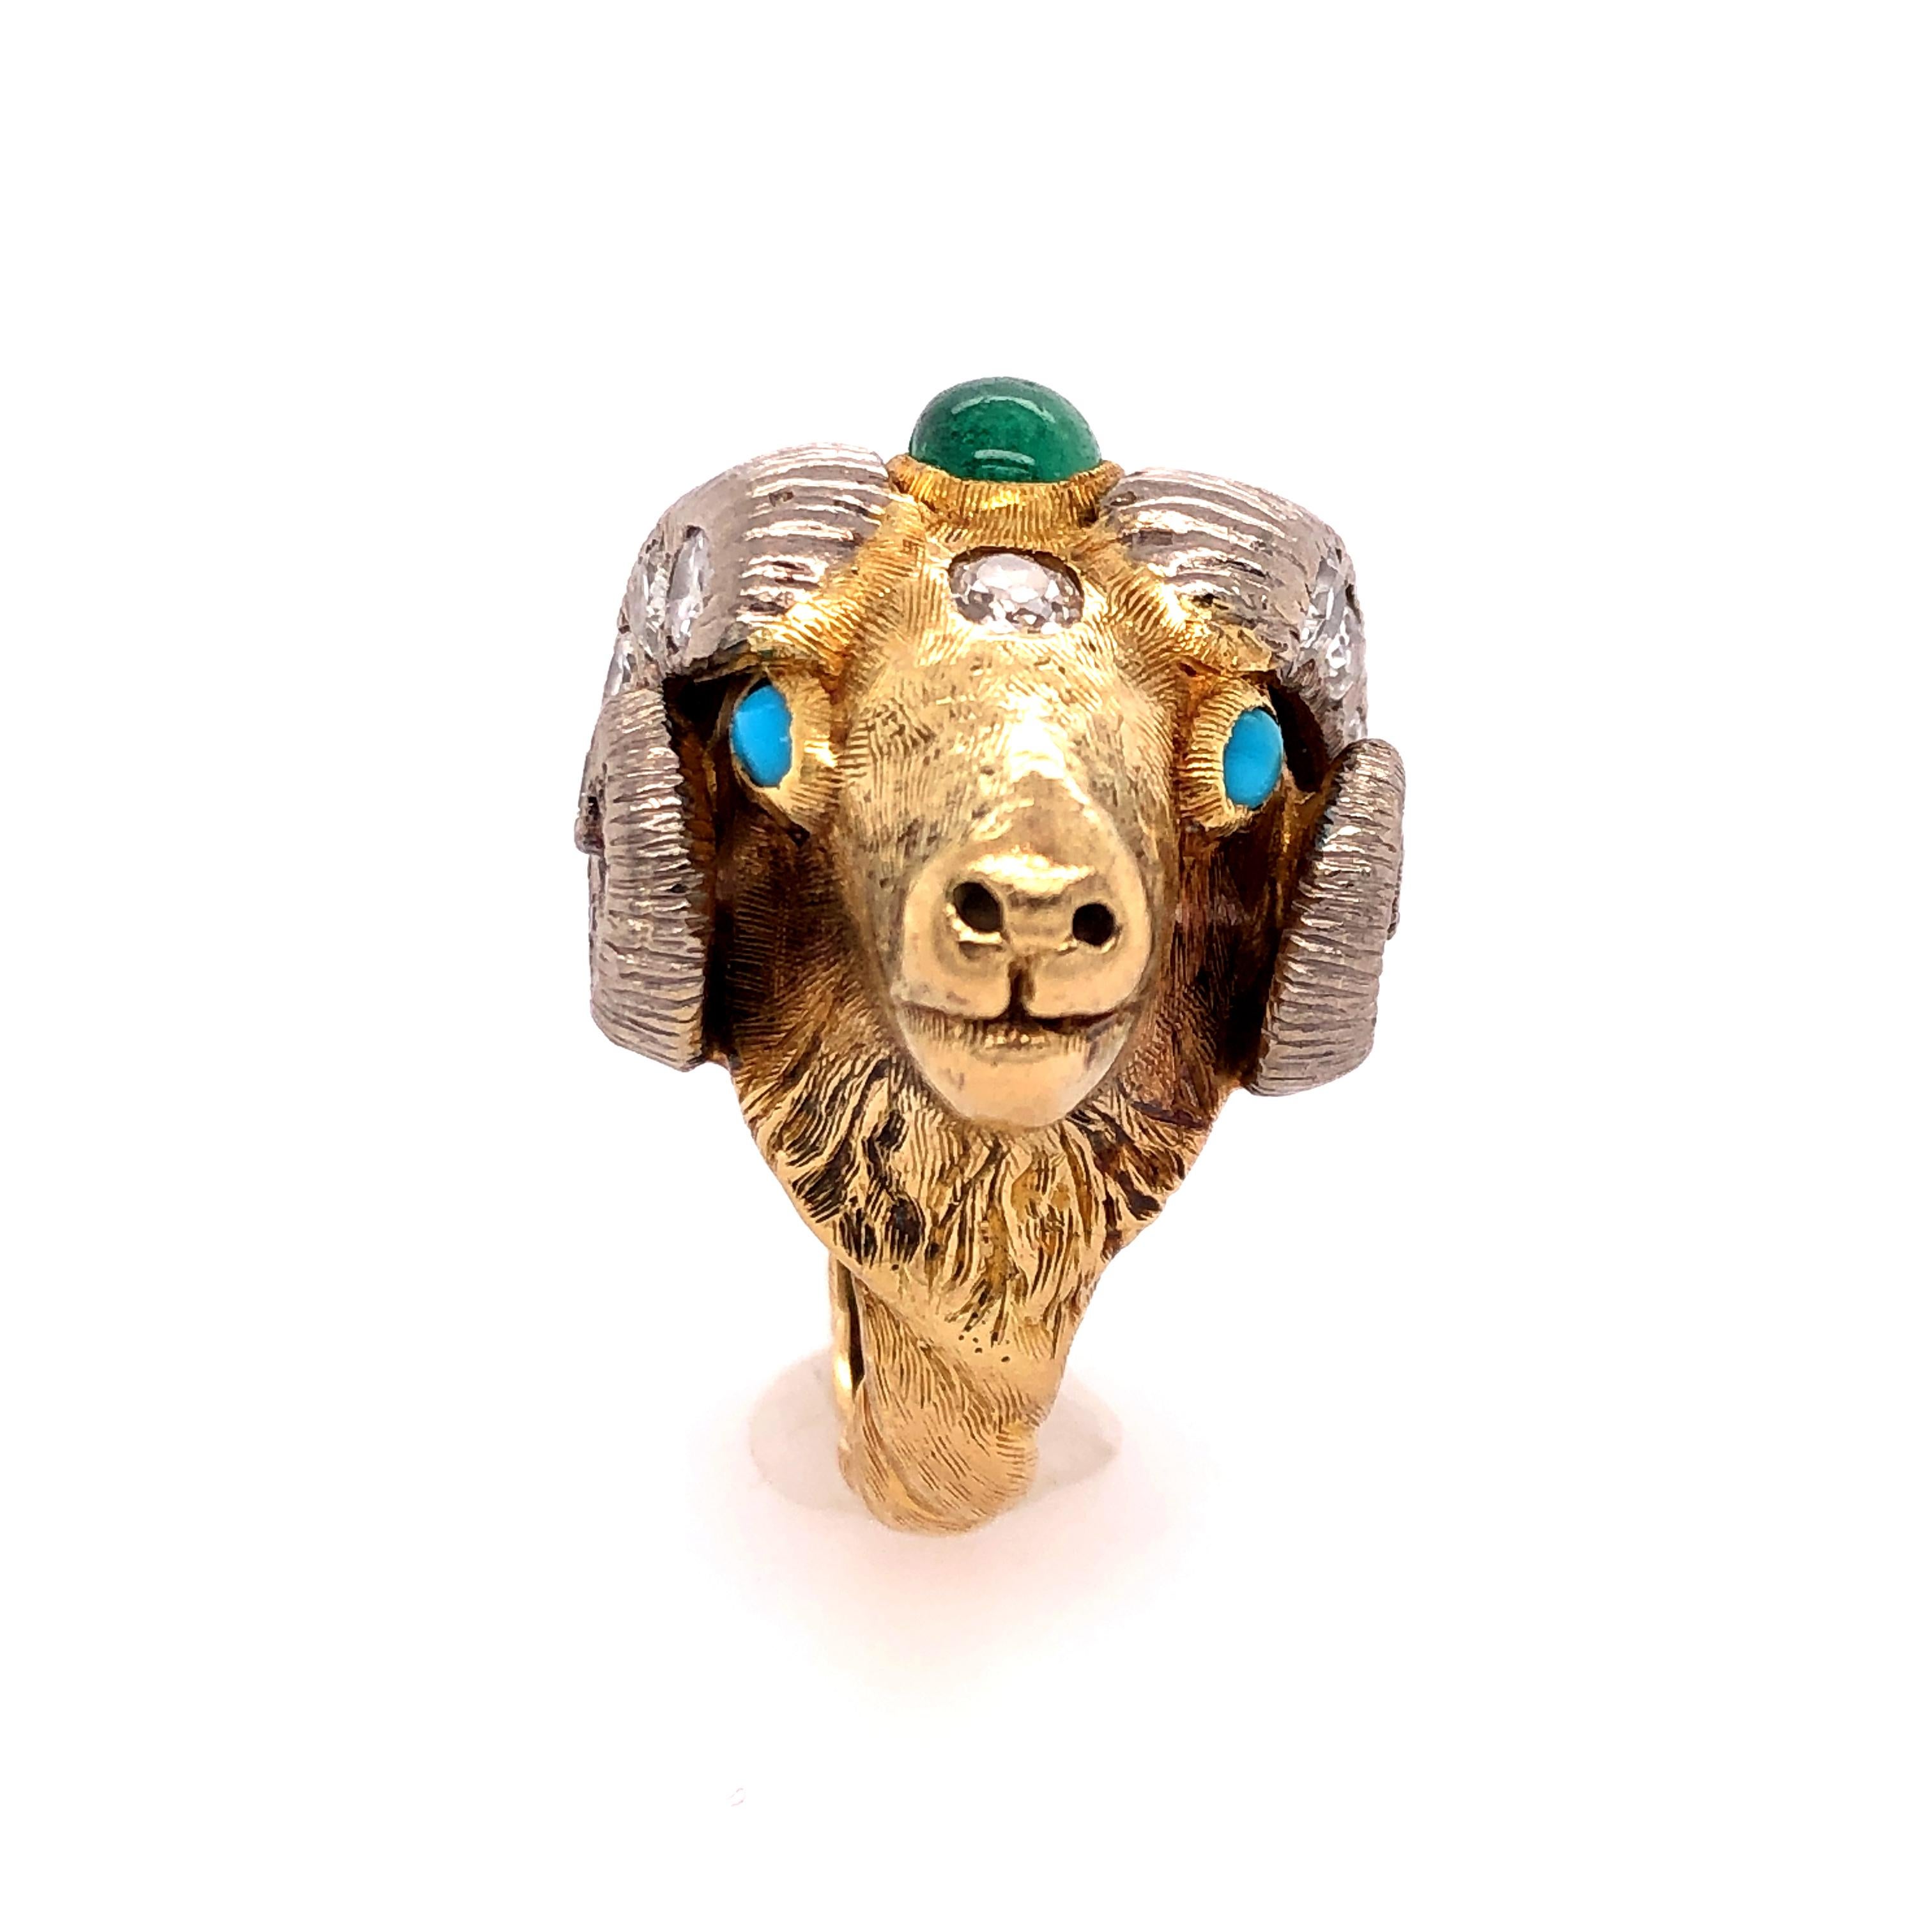 My Fellow Aries... this ring is for you! Skillfully sculpted vintage 18K ram's head ring is adorned with a large cabochon Emerald (7.5mm x 5mm), an oval faceted ruby (6.7mm x 5mm), turquoise (3.5mm x 2mm), and diamonds of varying sizes (between 6mm